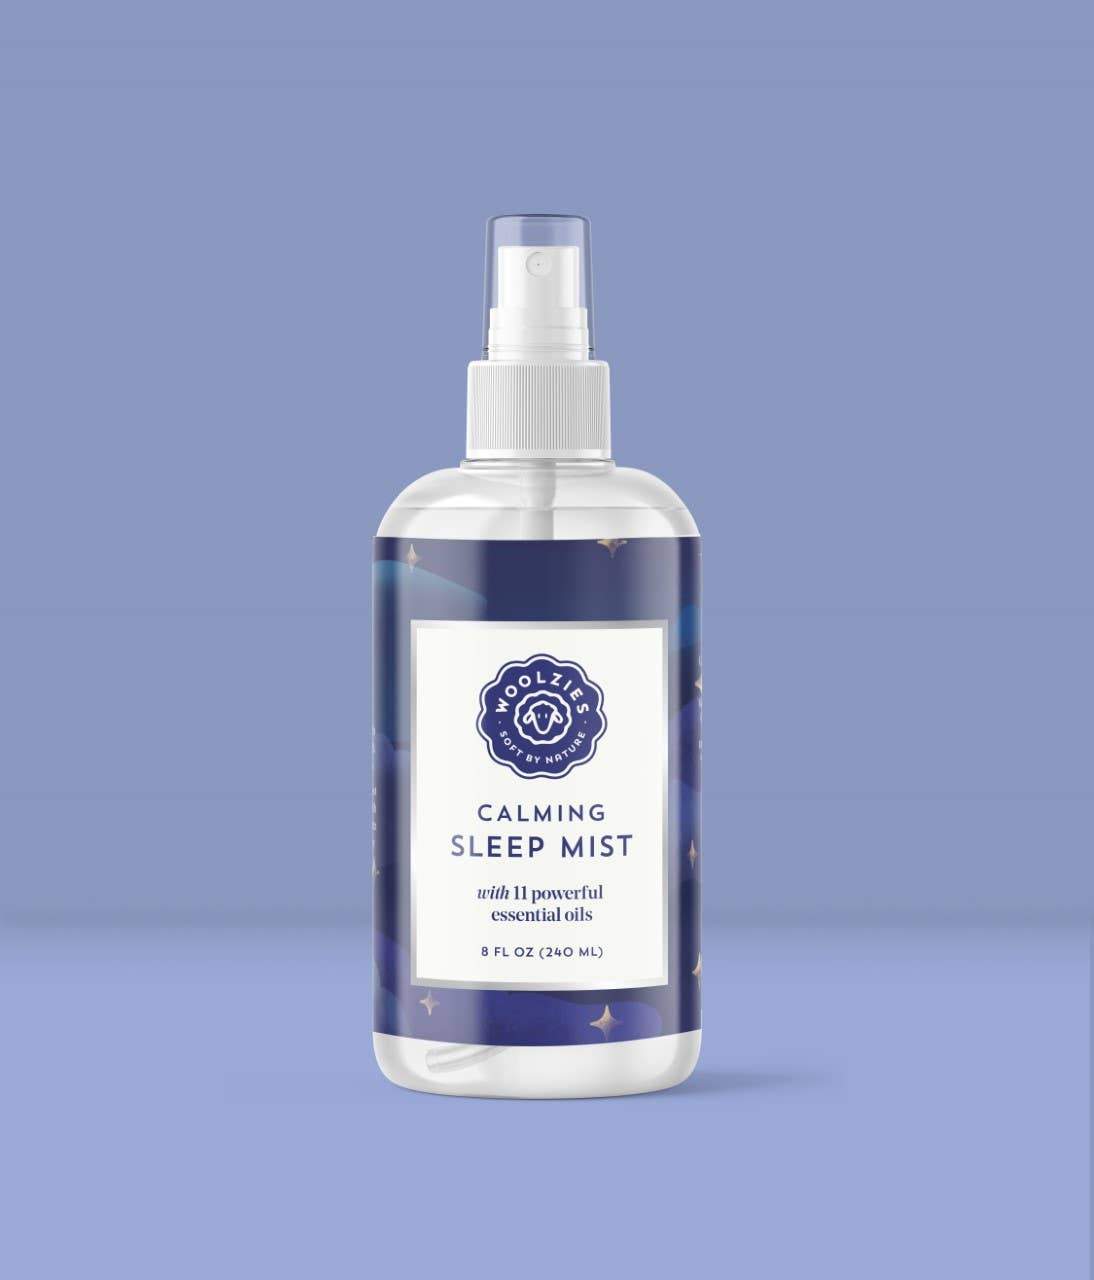 A transparent spray bottle labeled "Woolzies Calming Sleep Mist" with calming natural oils, displayed against a solid light blue background.